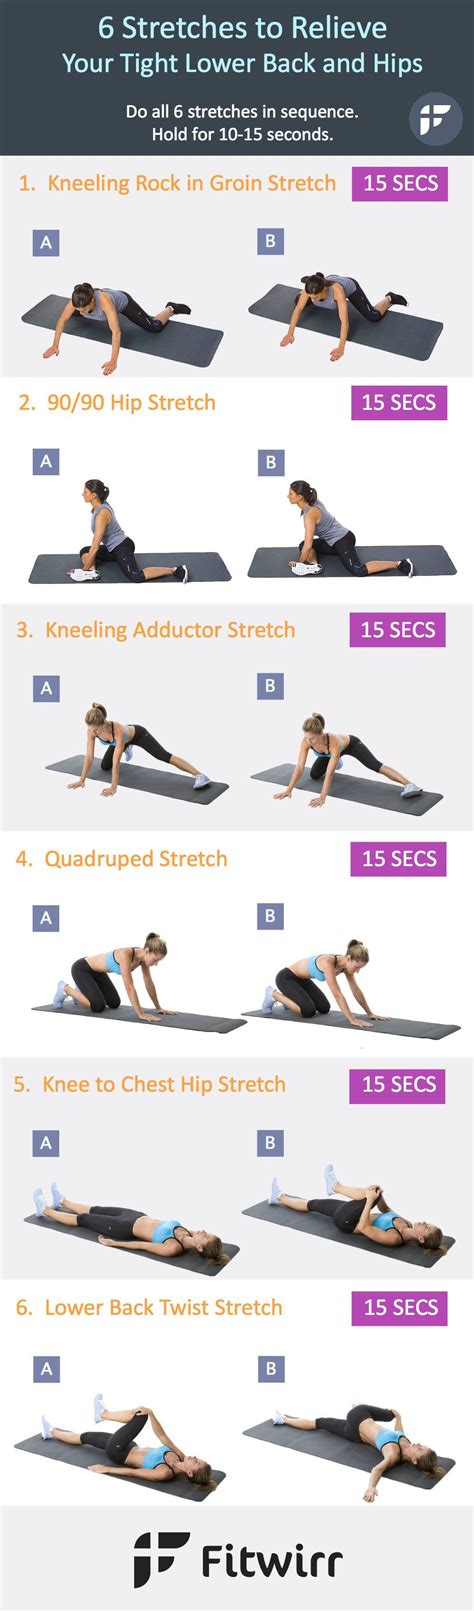 Stretches For Stiff Lower Back And Hips OFF 74